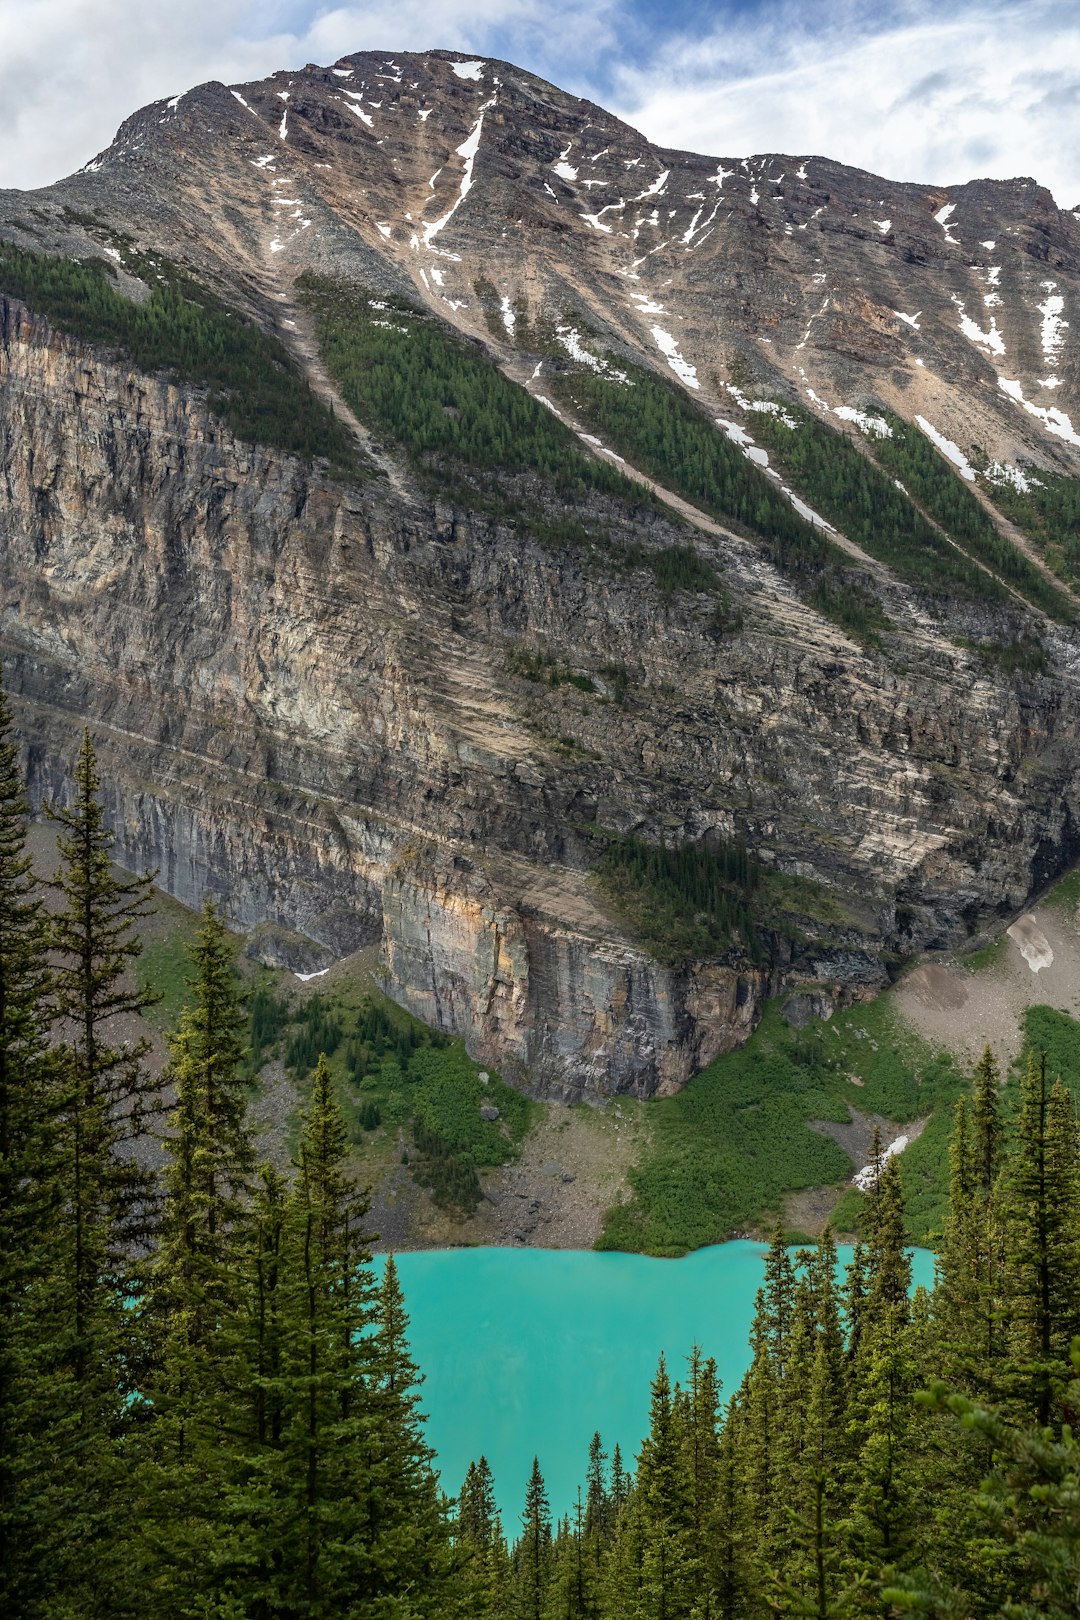 The rear part of Lake Louise as seen from the Lake Agnes Trail